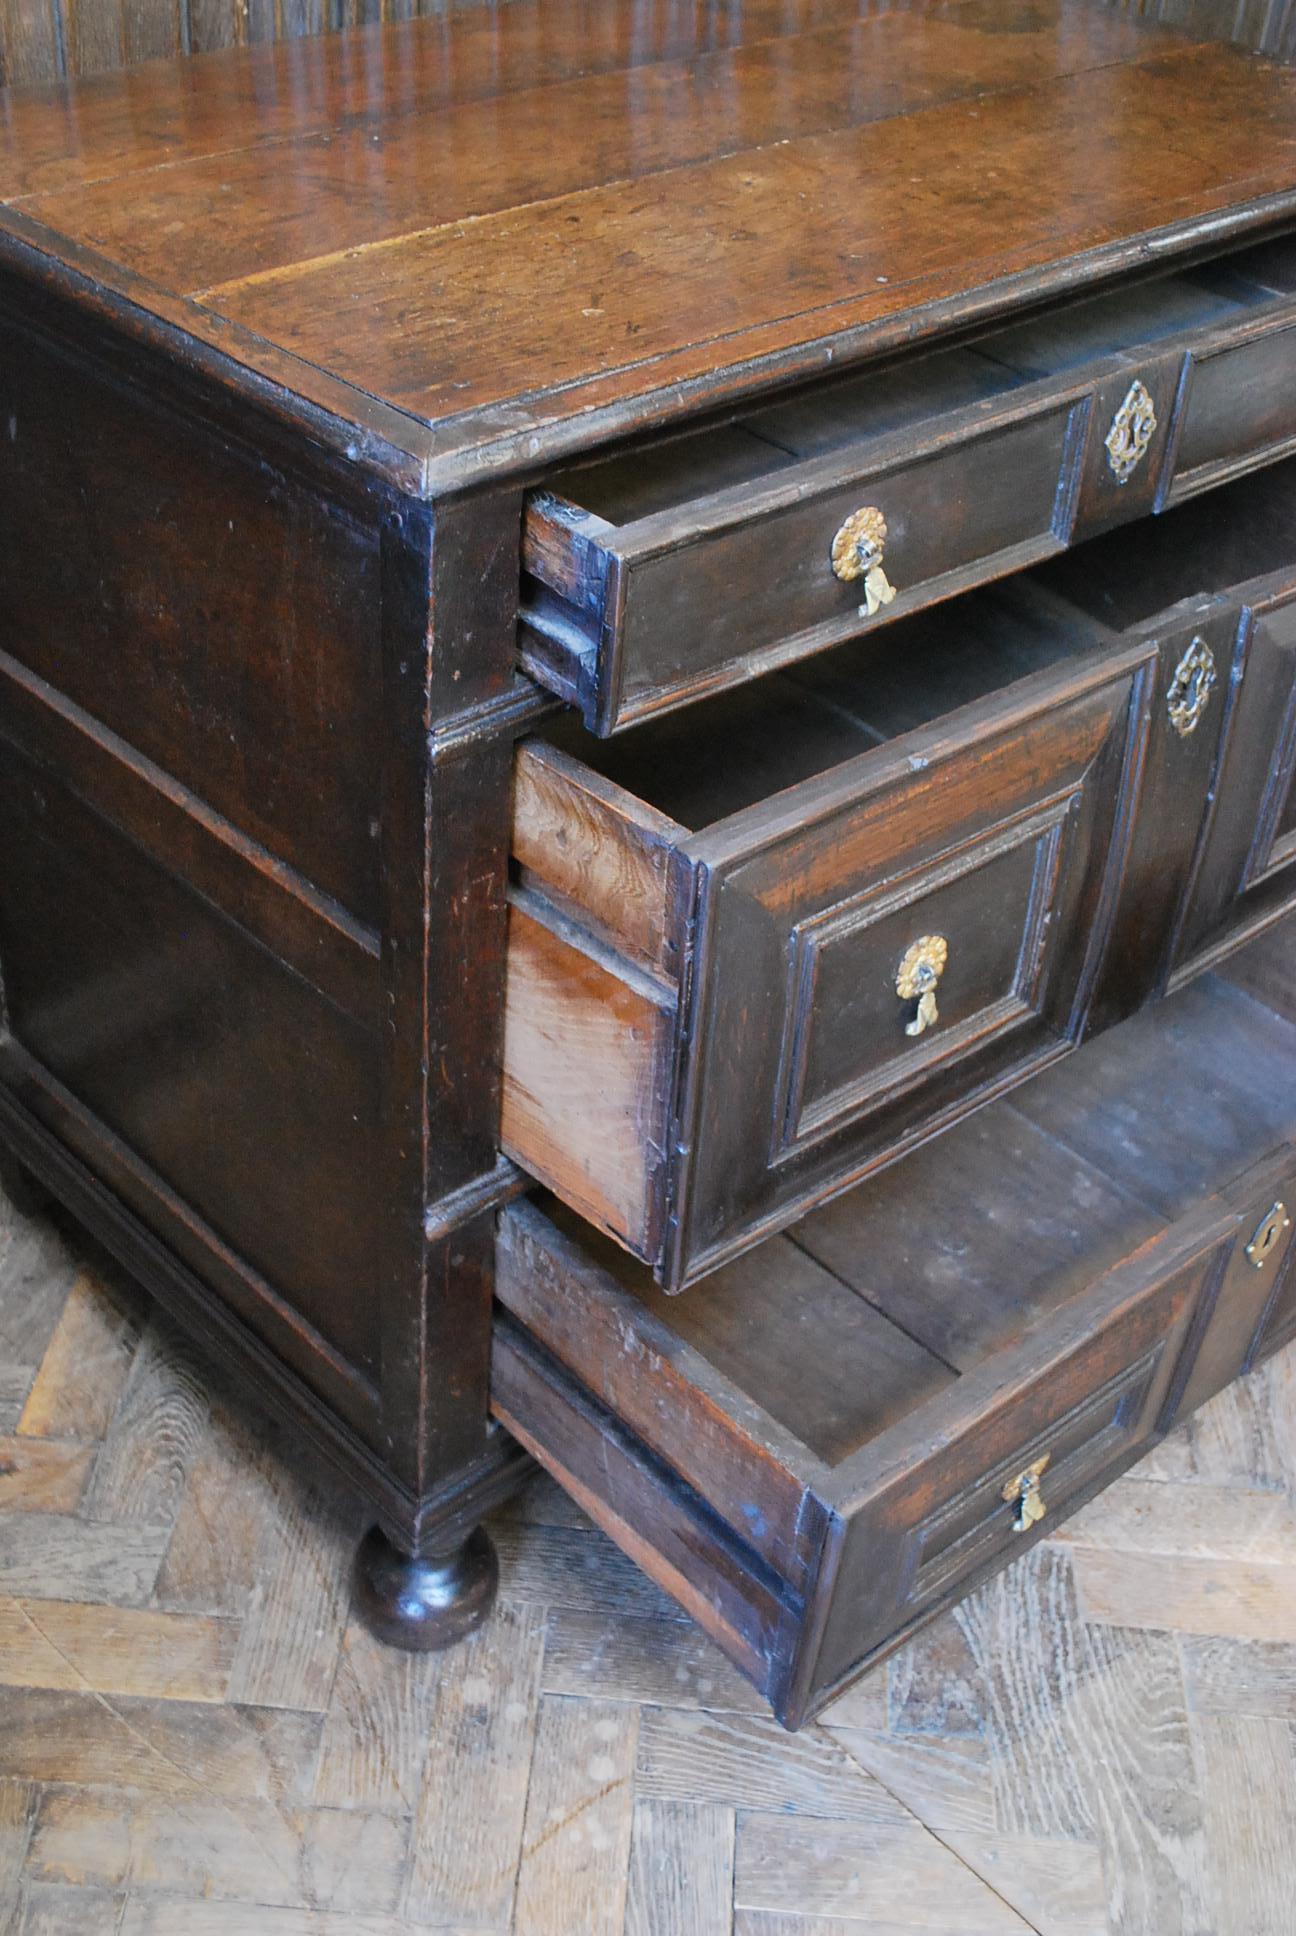 Hutton-Clarke Antiques is delighted to present a compact Jacobean oak chest of drawers dating back to the early 17th century. This exquisite piece features superb color and patination, resting gracefully on its original bun feet. The charm is